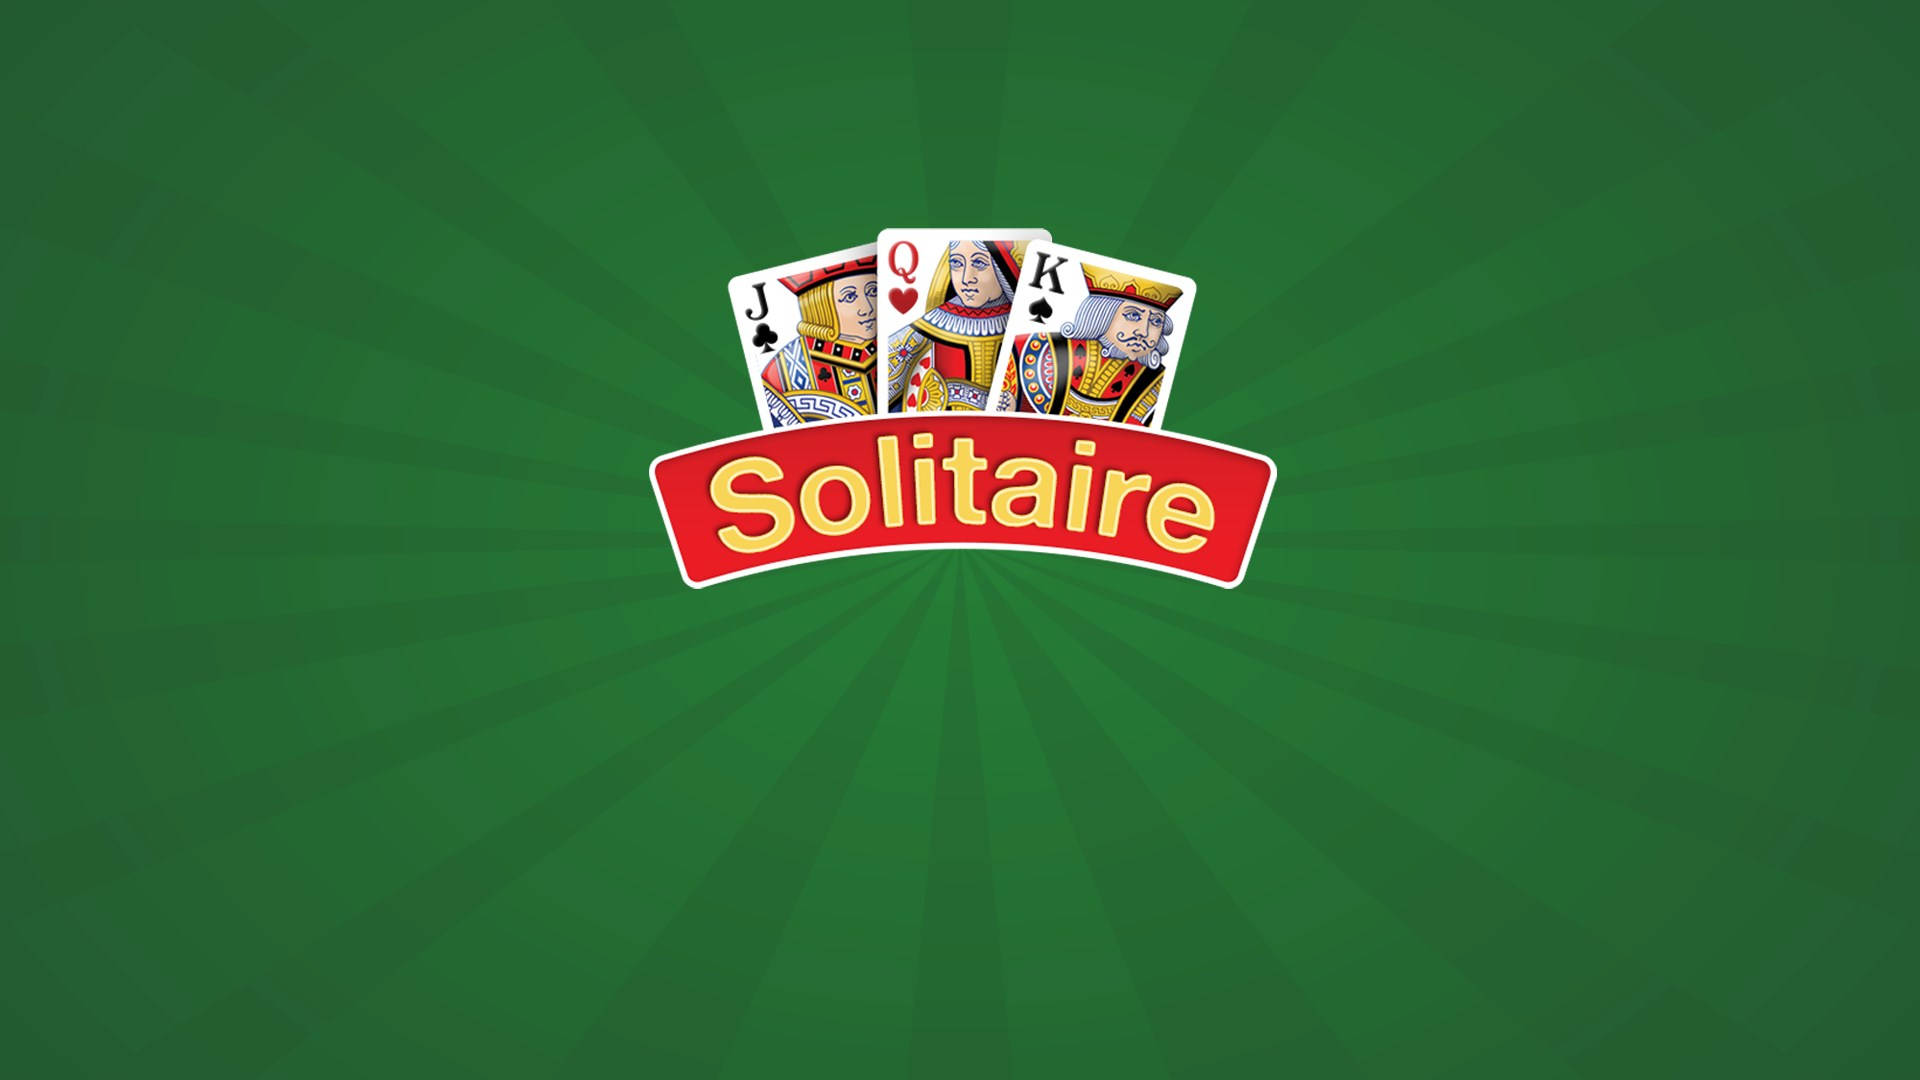 Microsoft Solitaire Suite Playing Cards Wallpaper